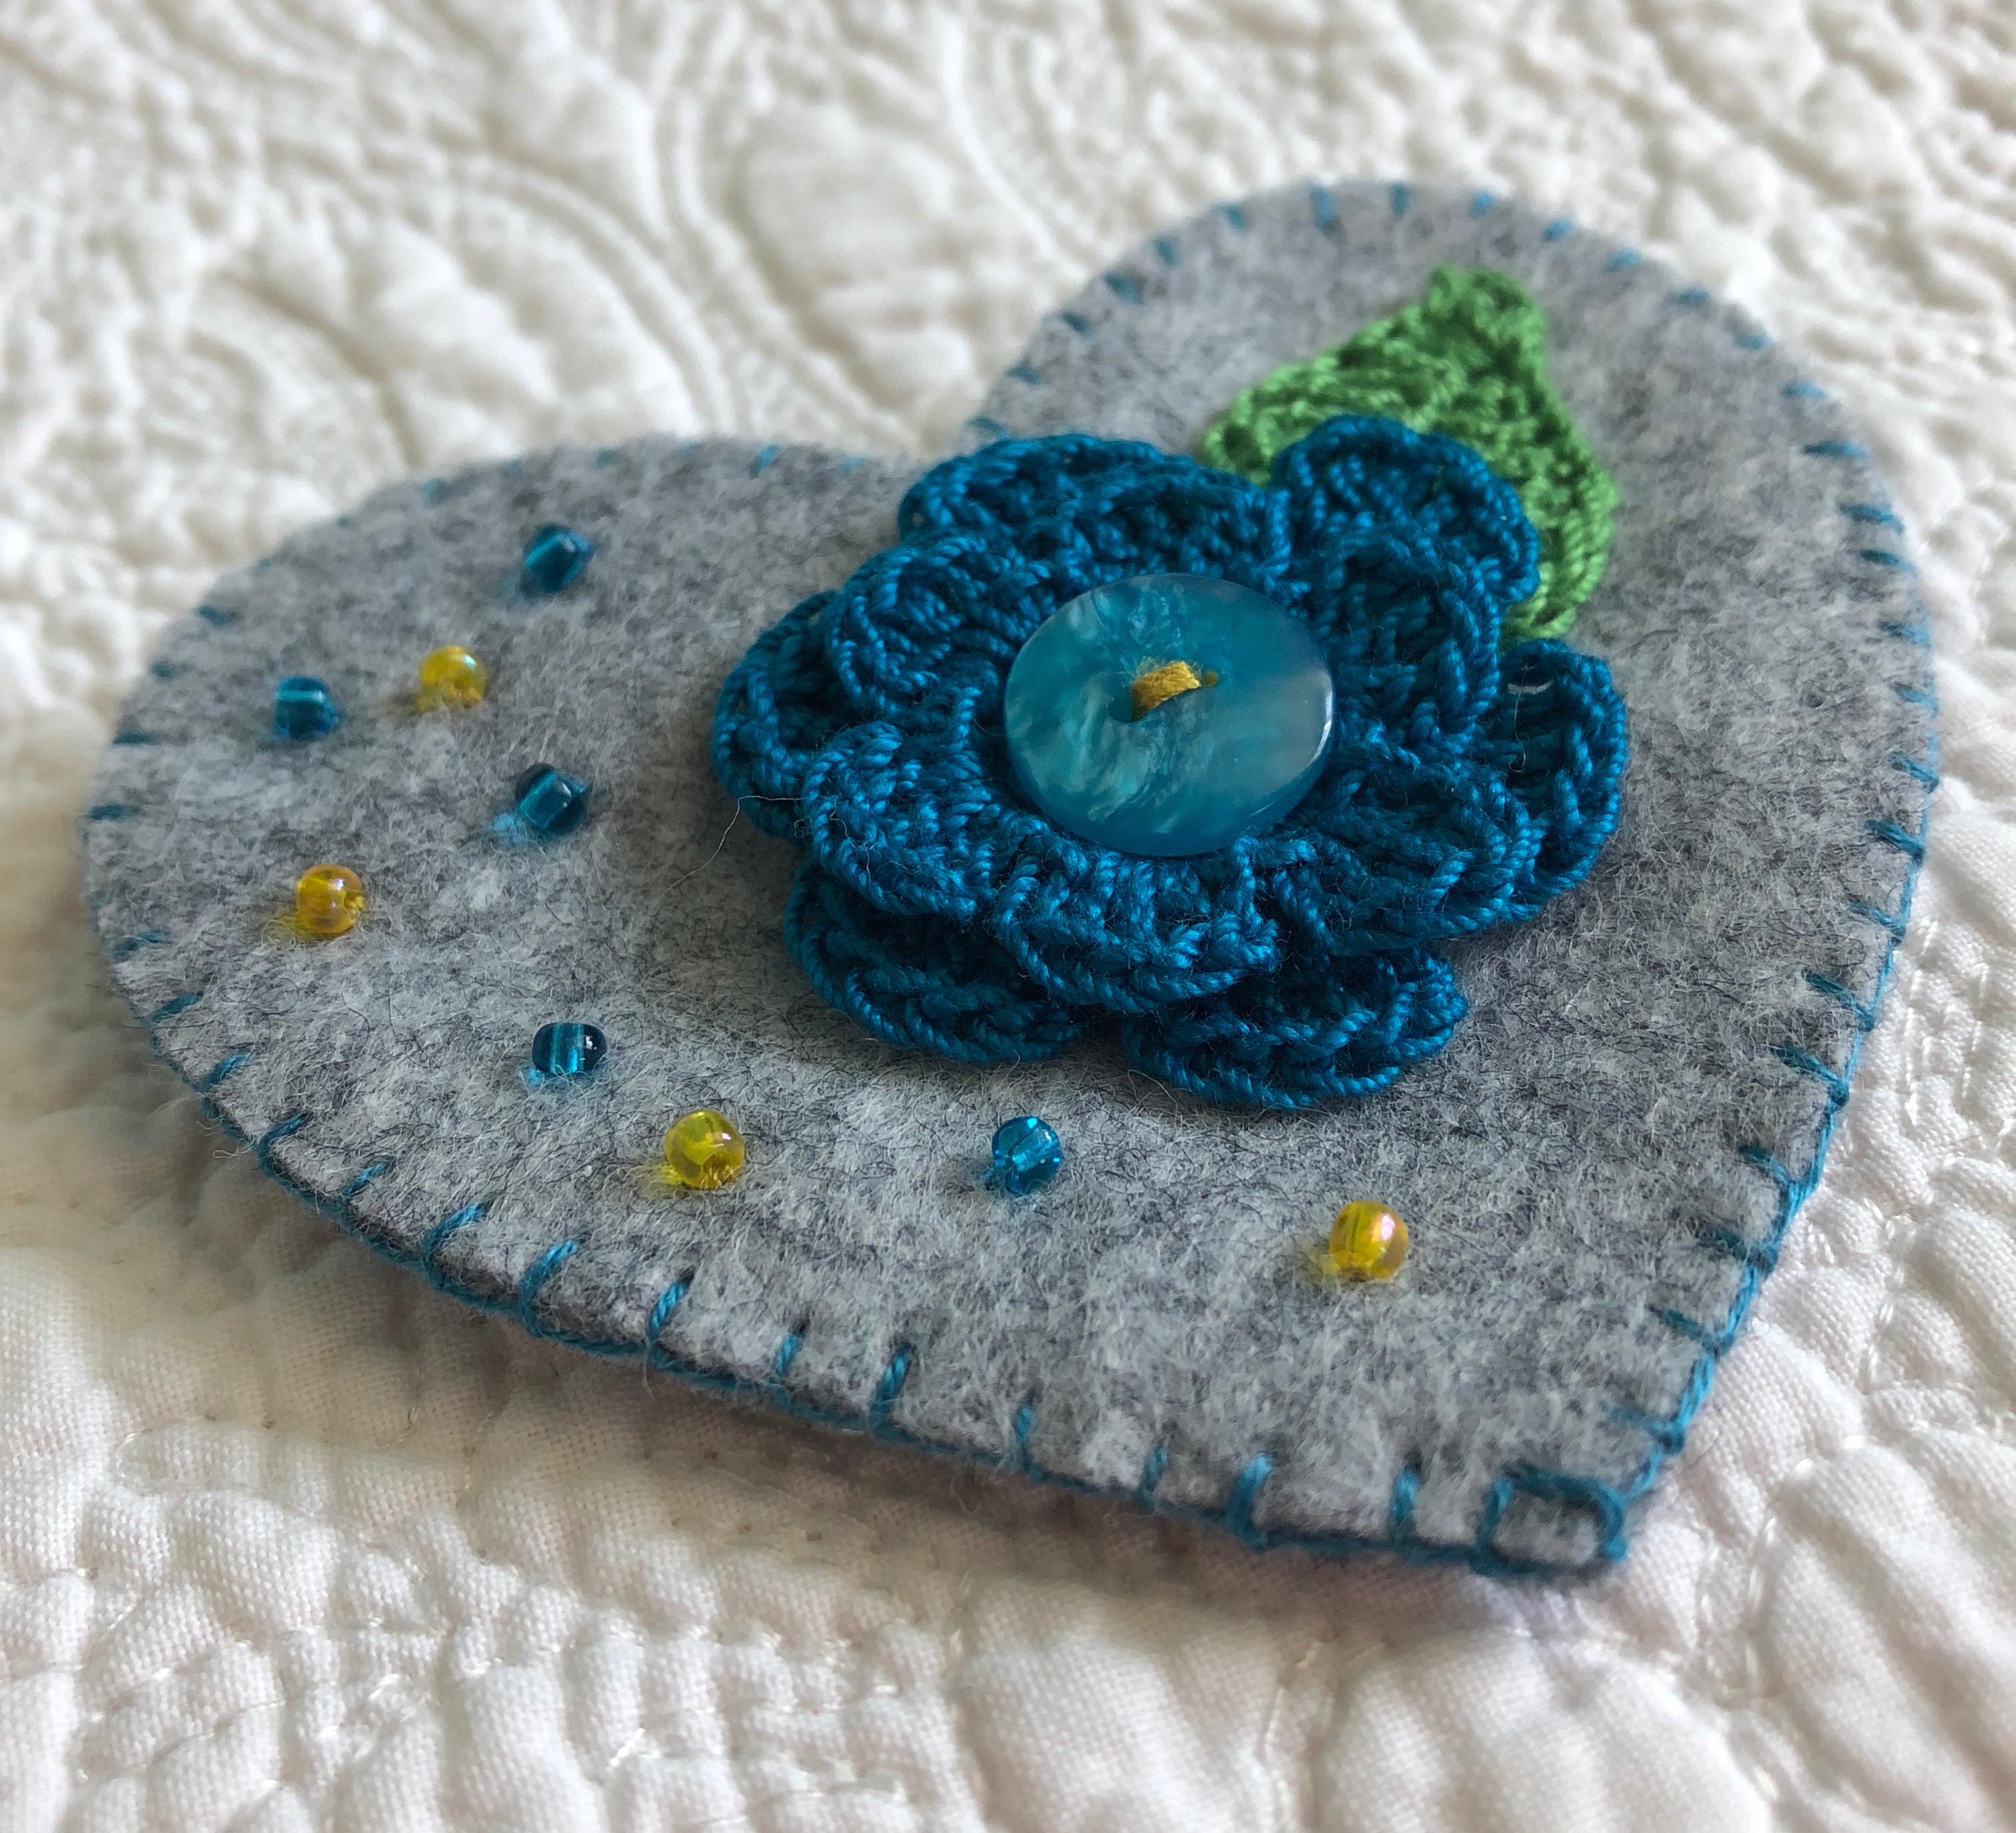 Handmade and hand stitched grey felt heart with a blue crocheted flower and green leaf embellished with a button and tiny glass beads.